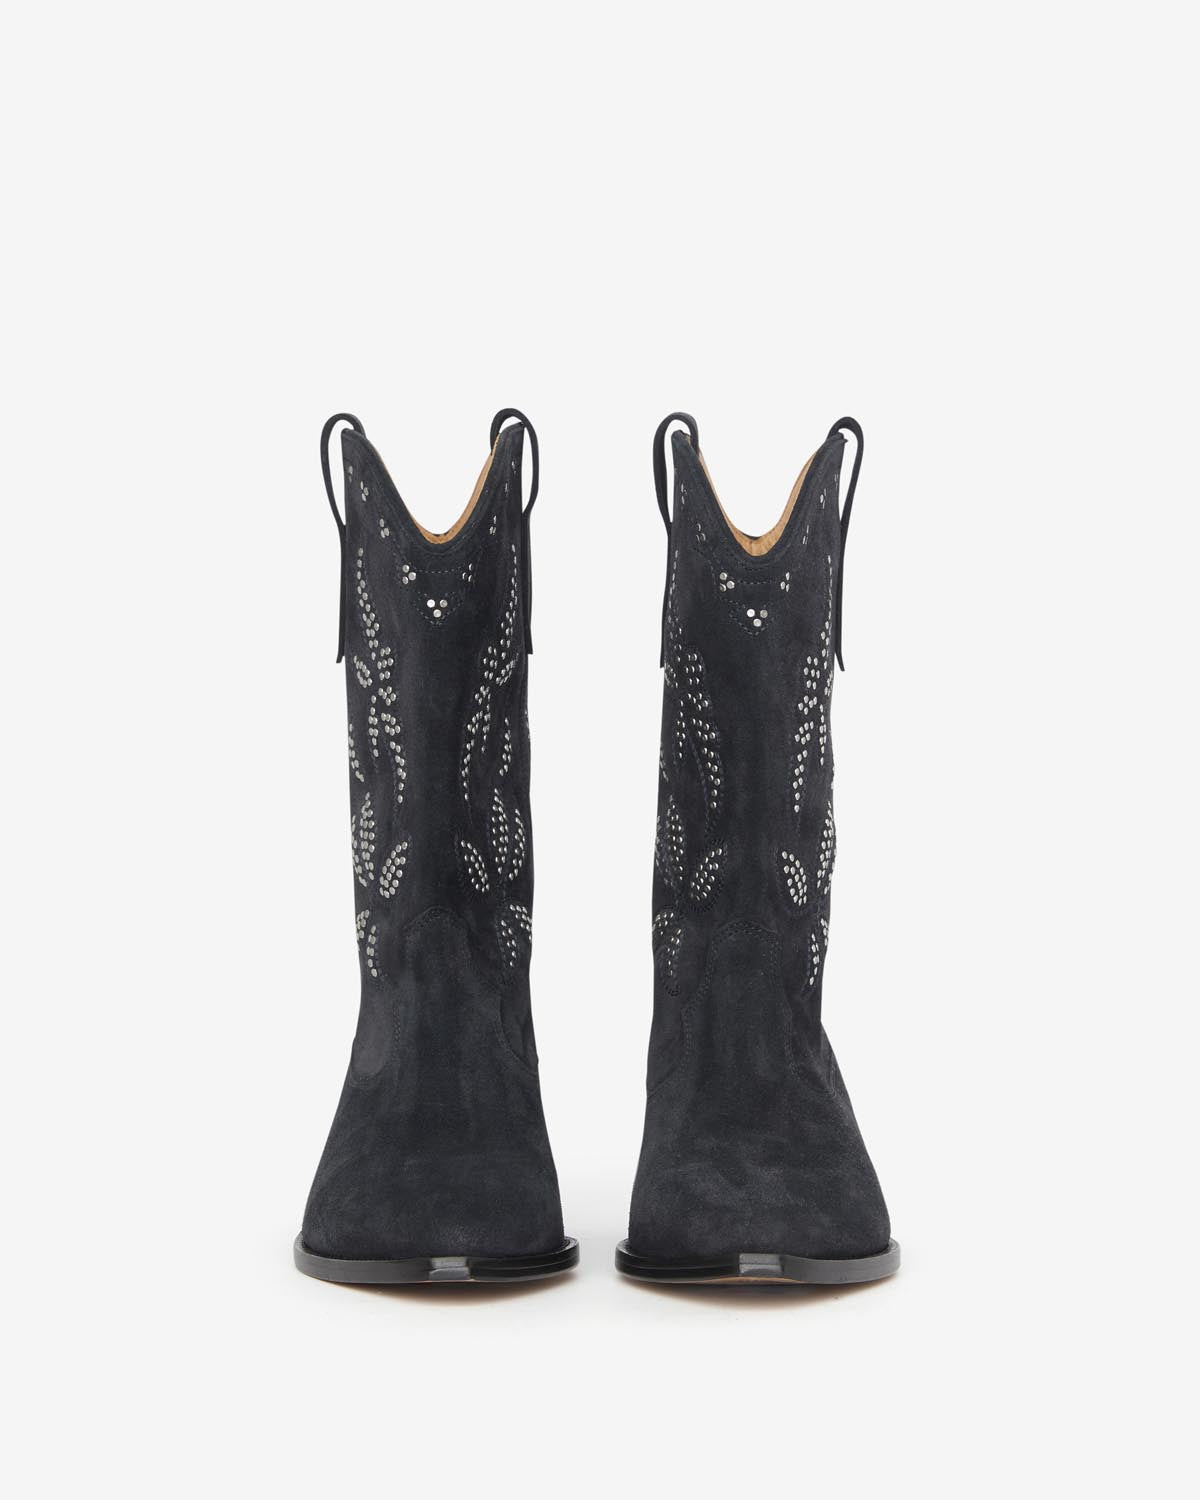 Boots duerto Woman Faded black-silver 1